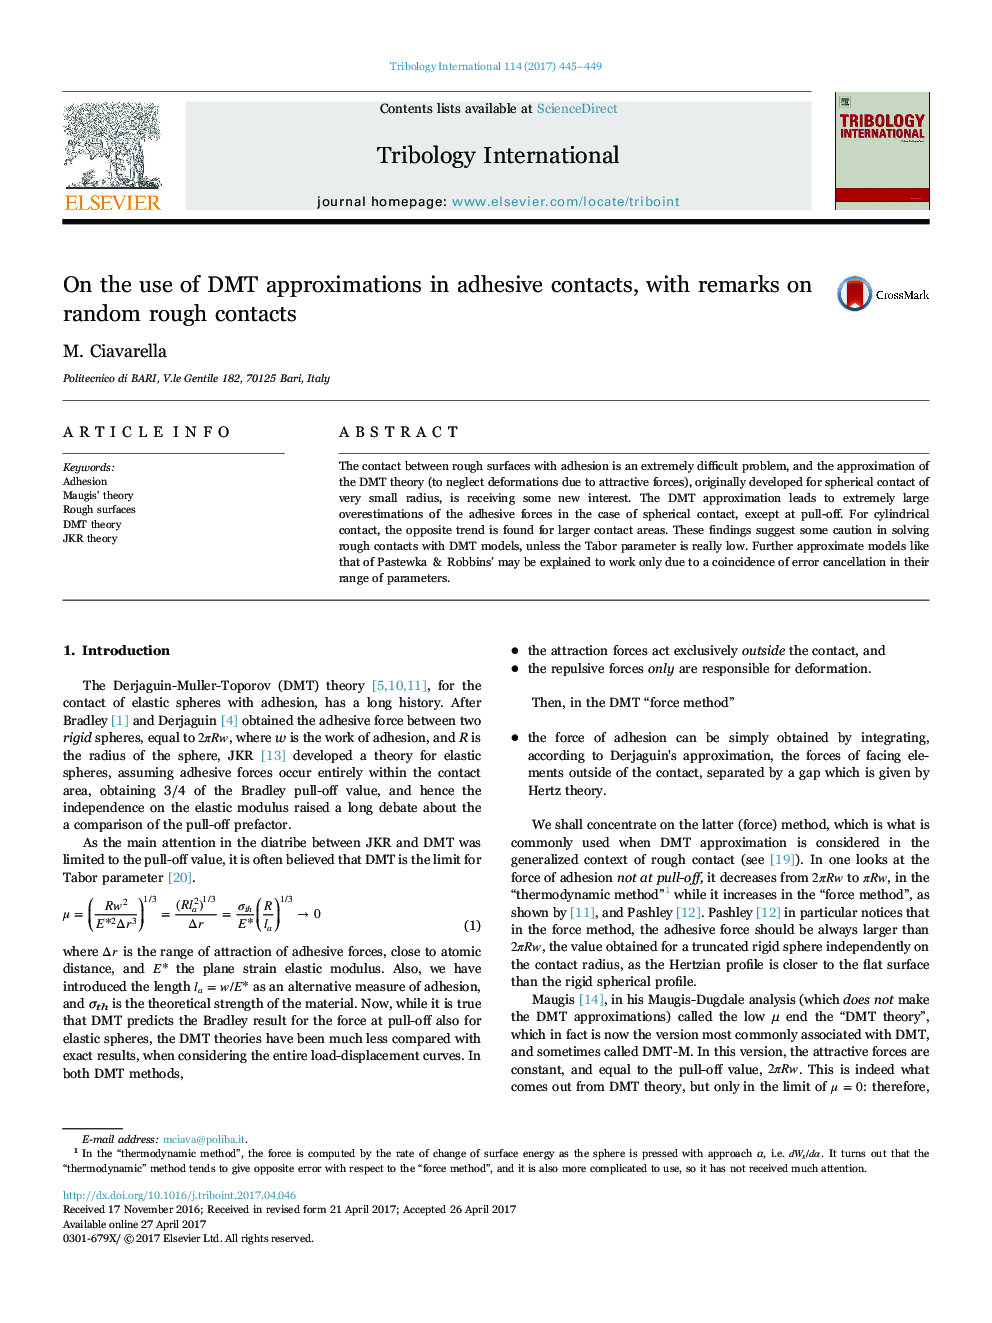 On the use of DMT approximations in adhesive contacts, with remarks on random rough contacts